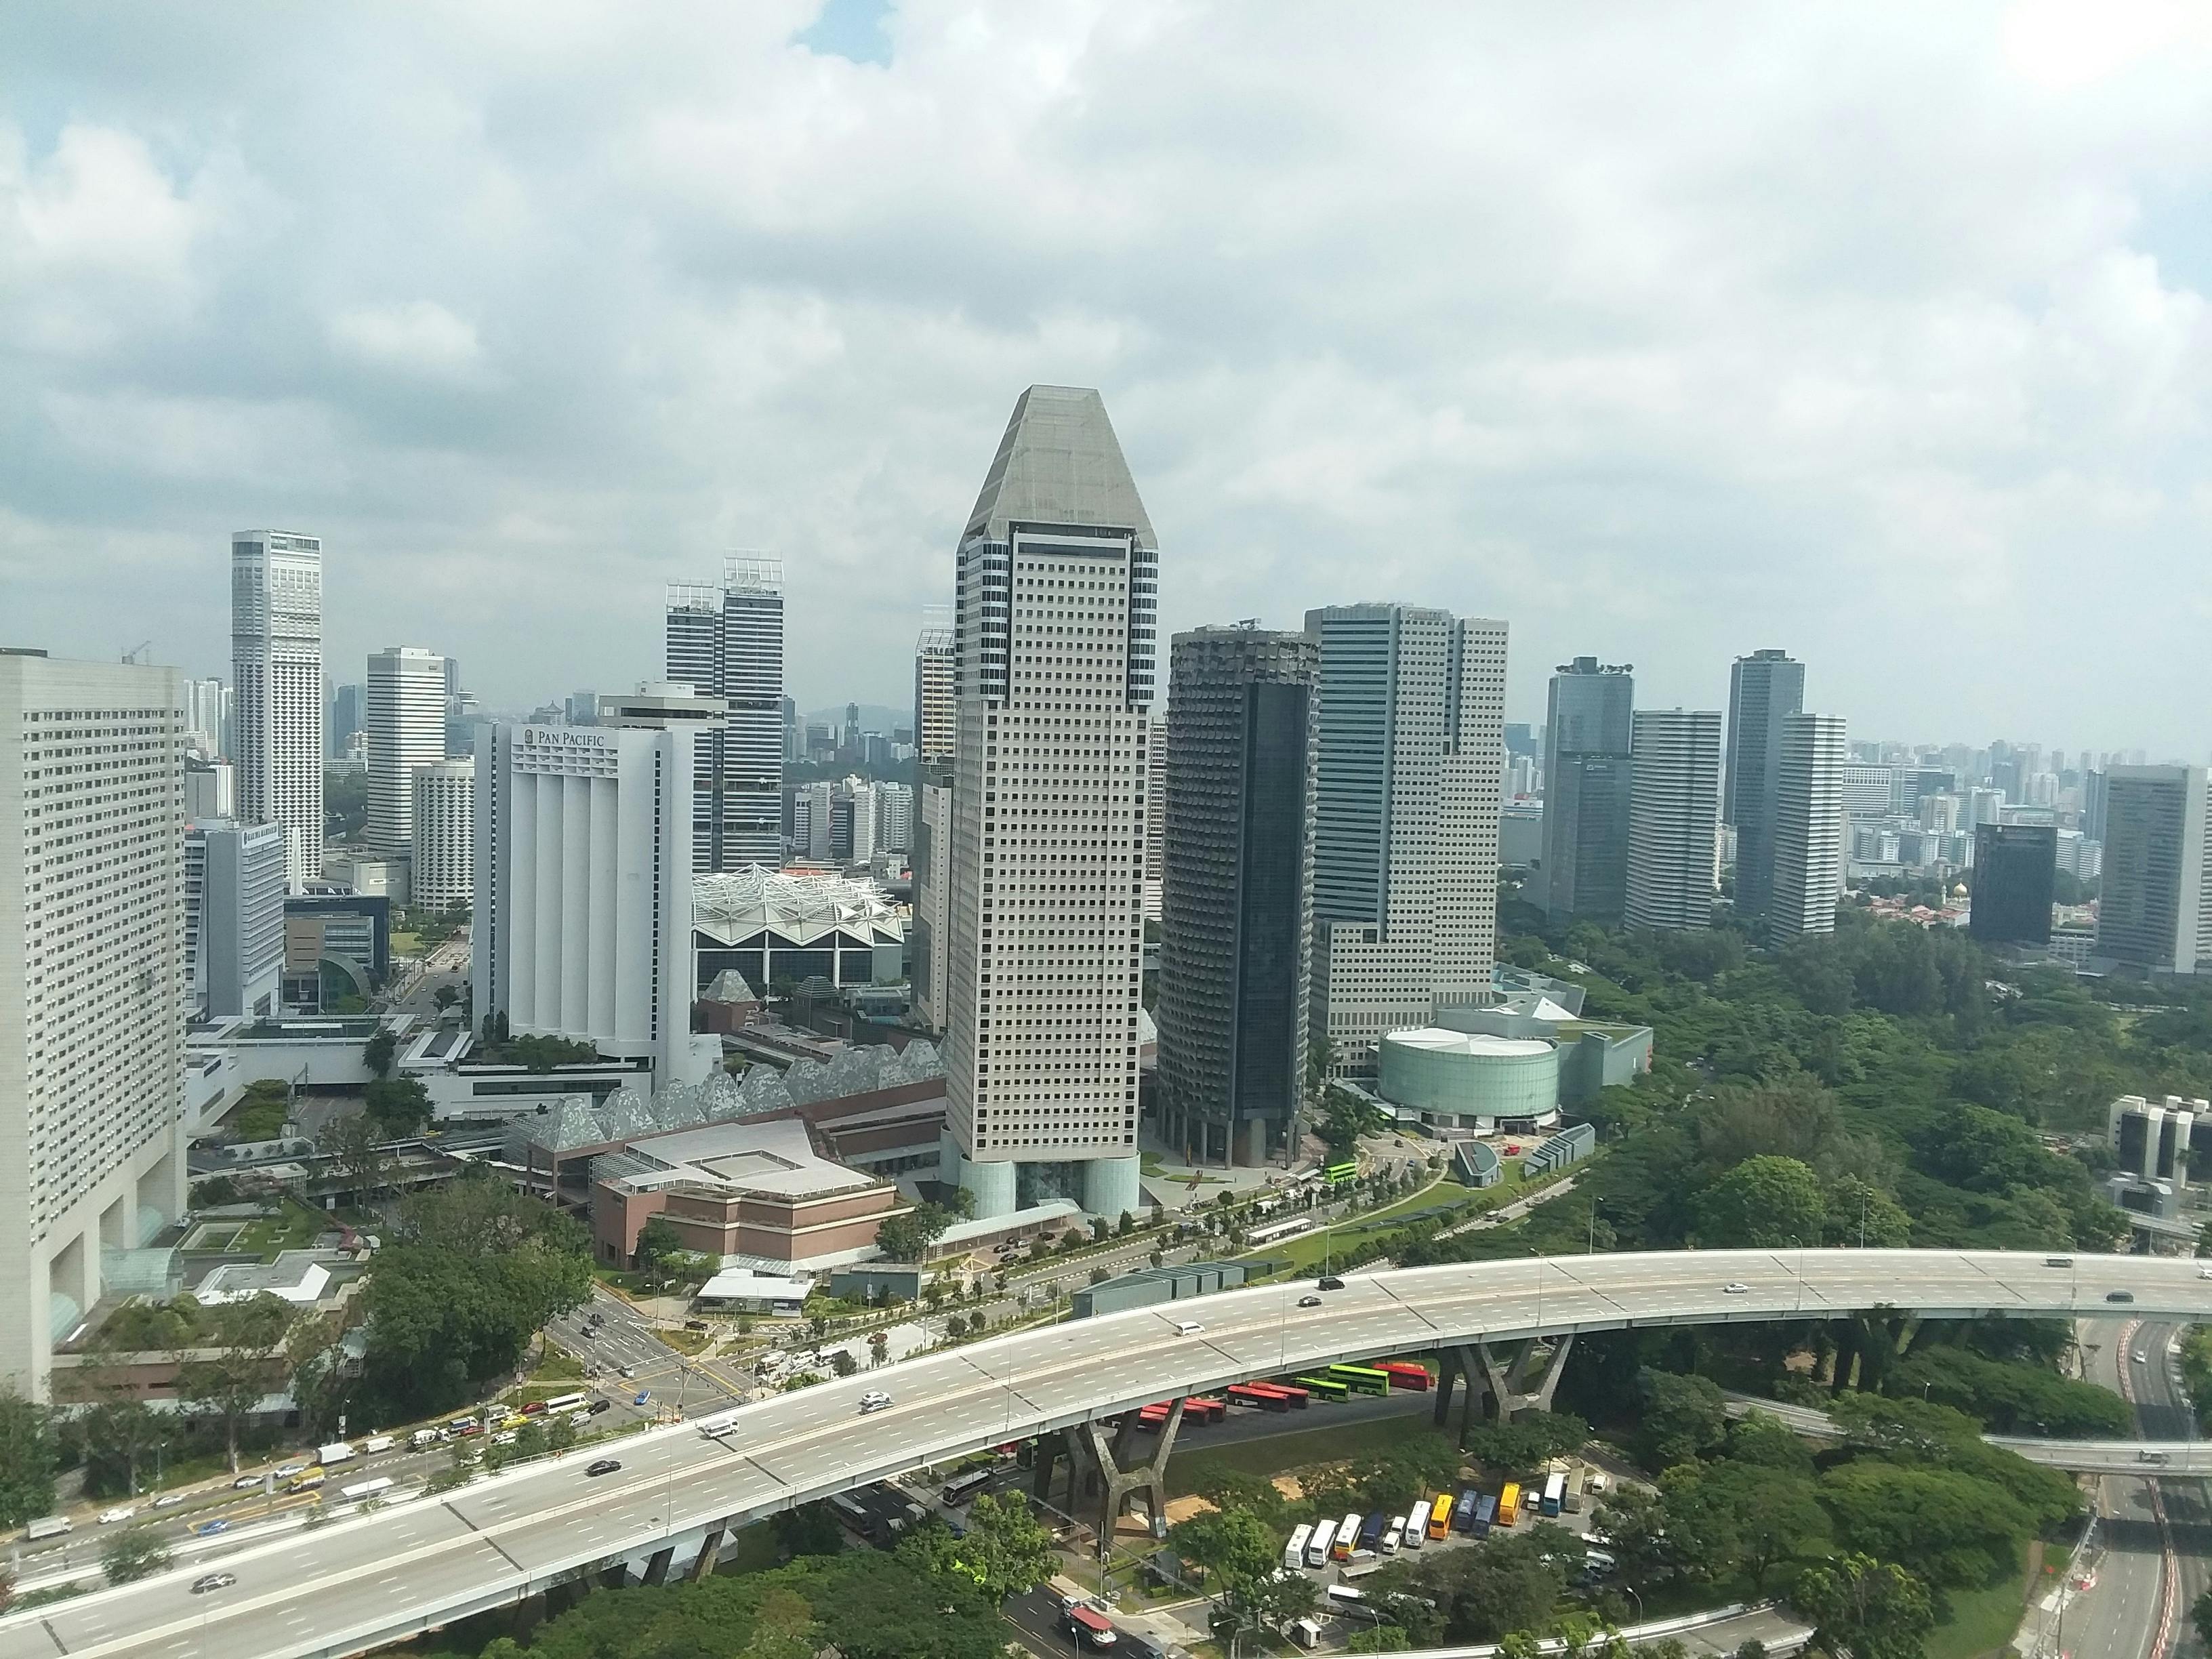 Free stock photo of View Outside Singapore Flyer